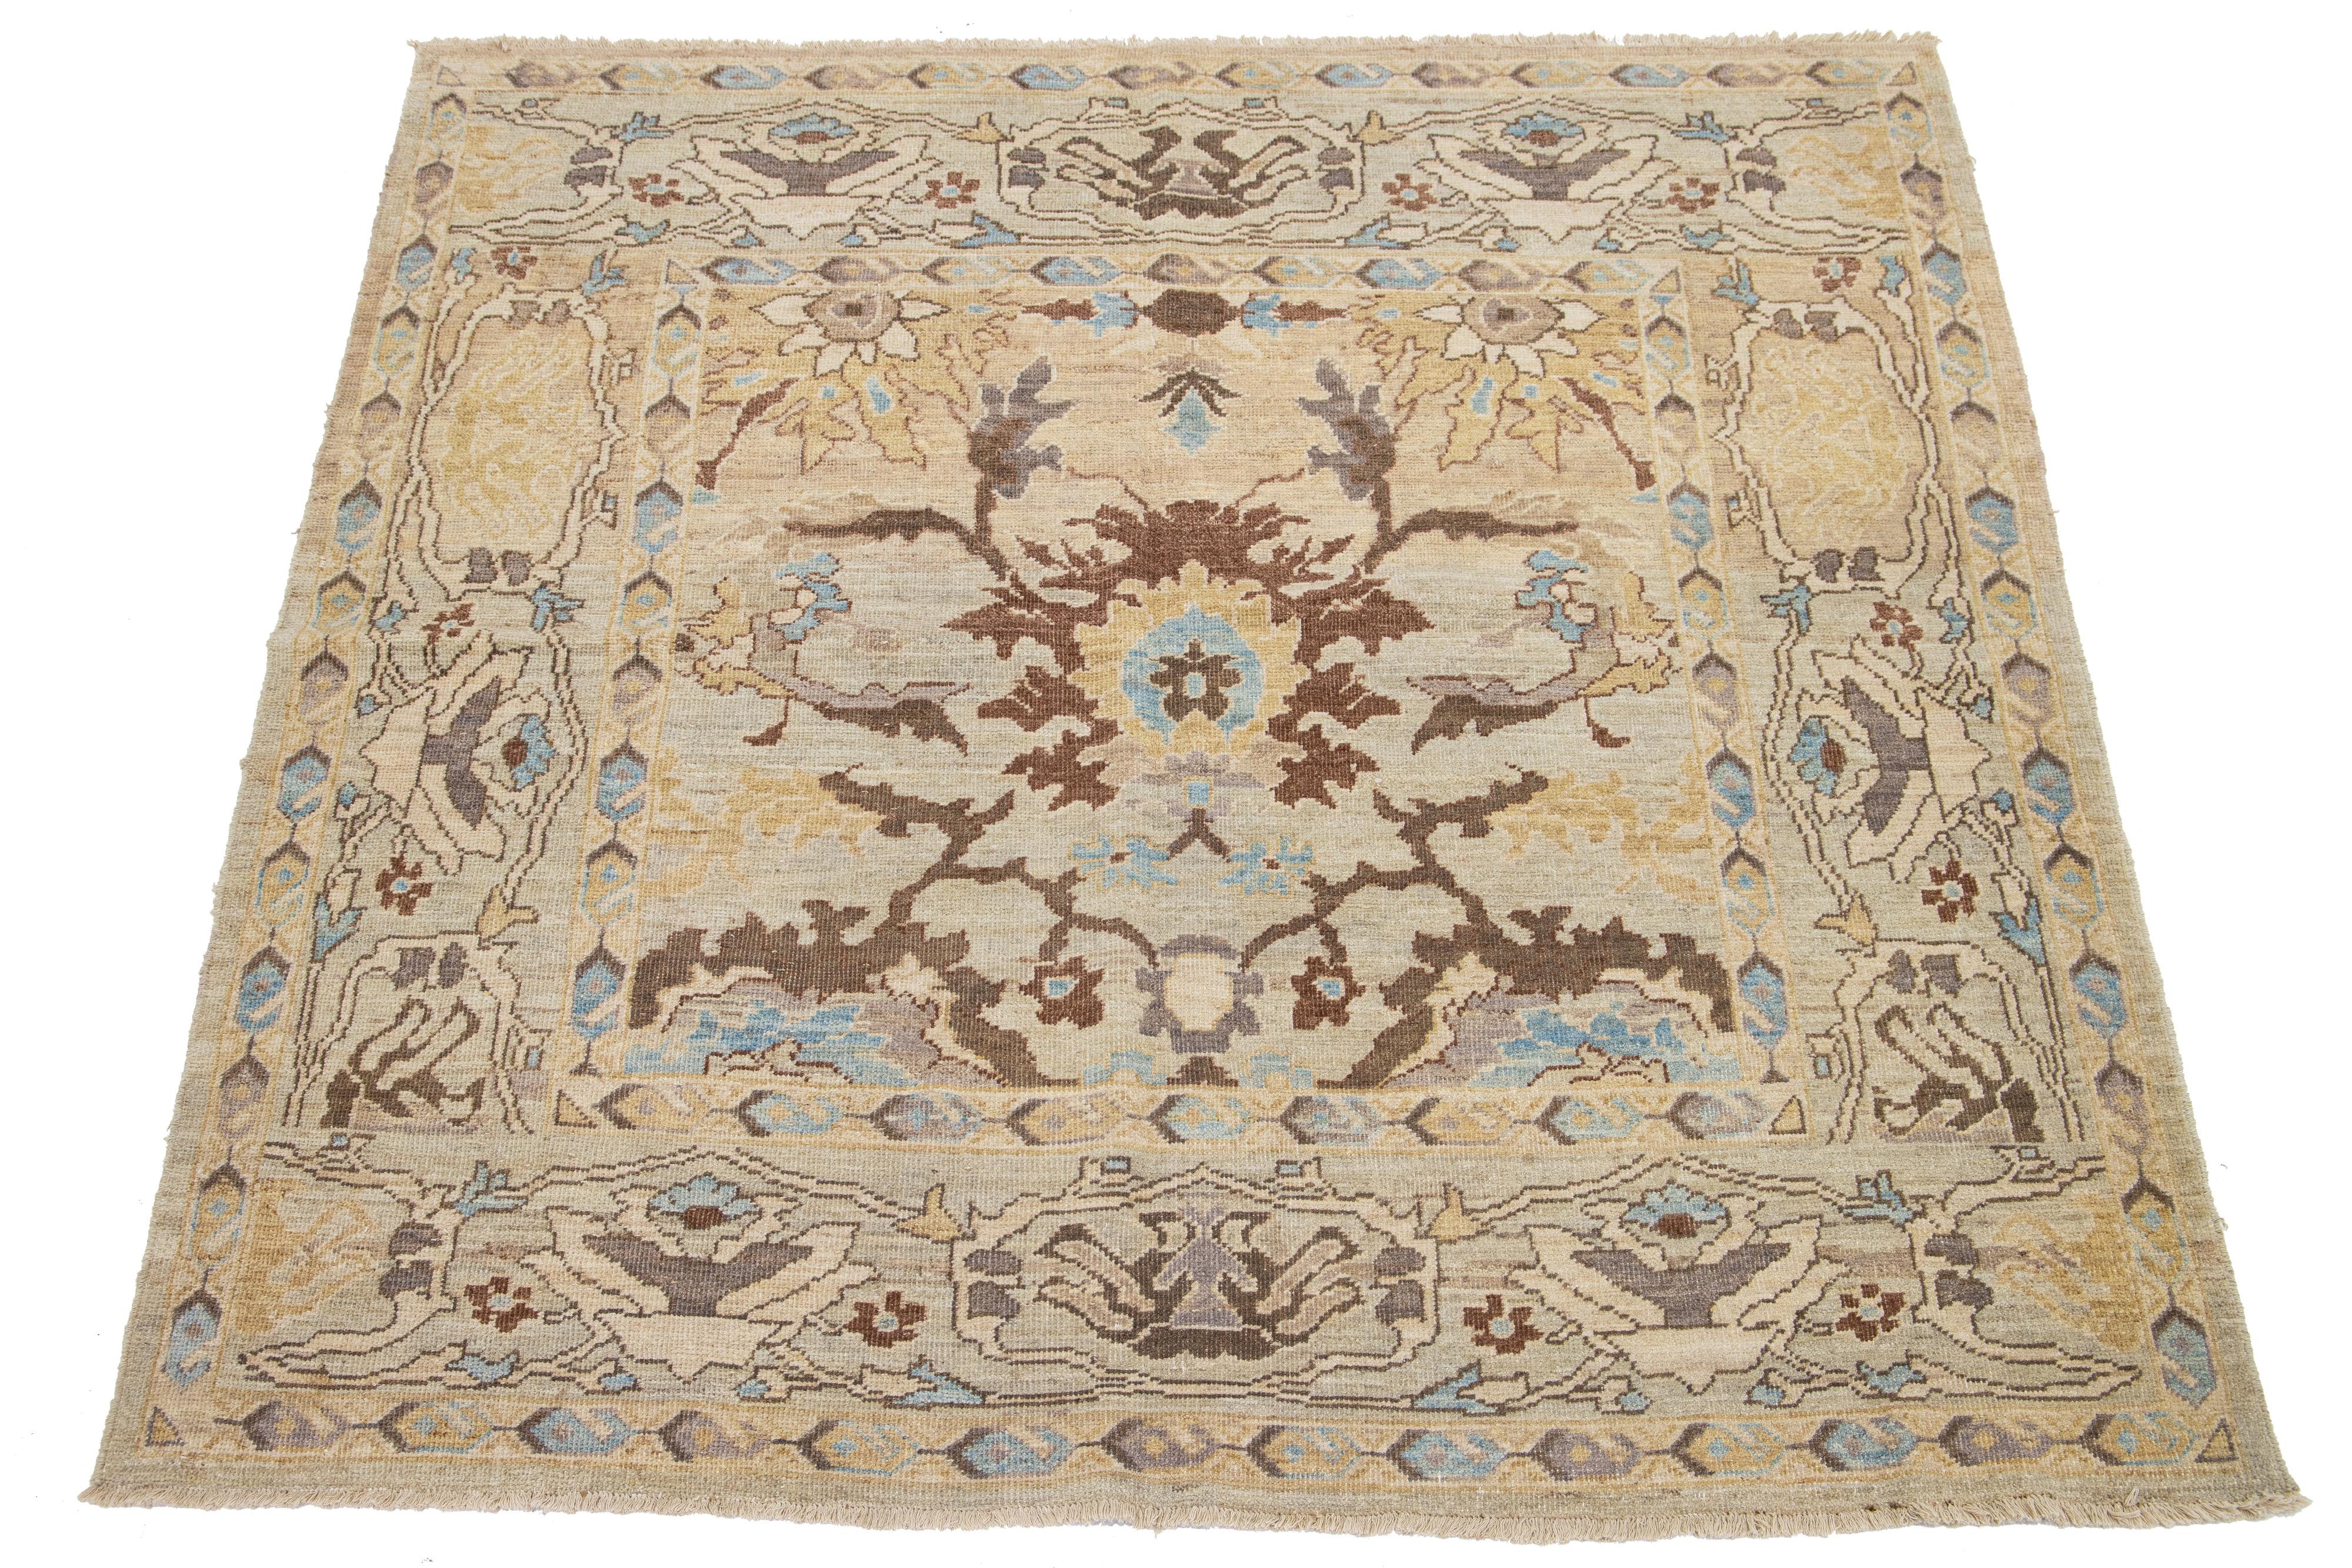 This is a hand-knotted Persian wool rug with a beige field. The design has accents in brown, blue, and goldenrod.

This rug measures at 6'2